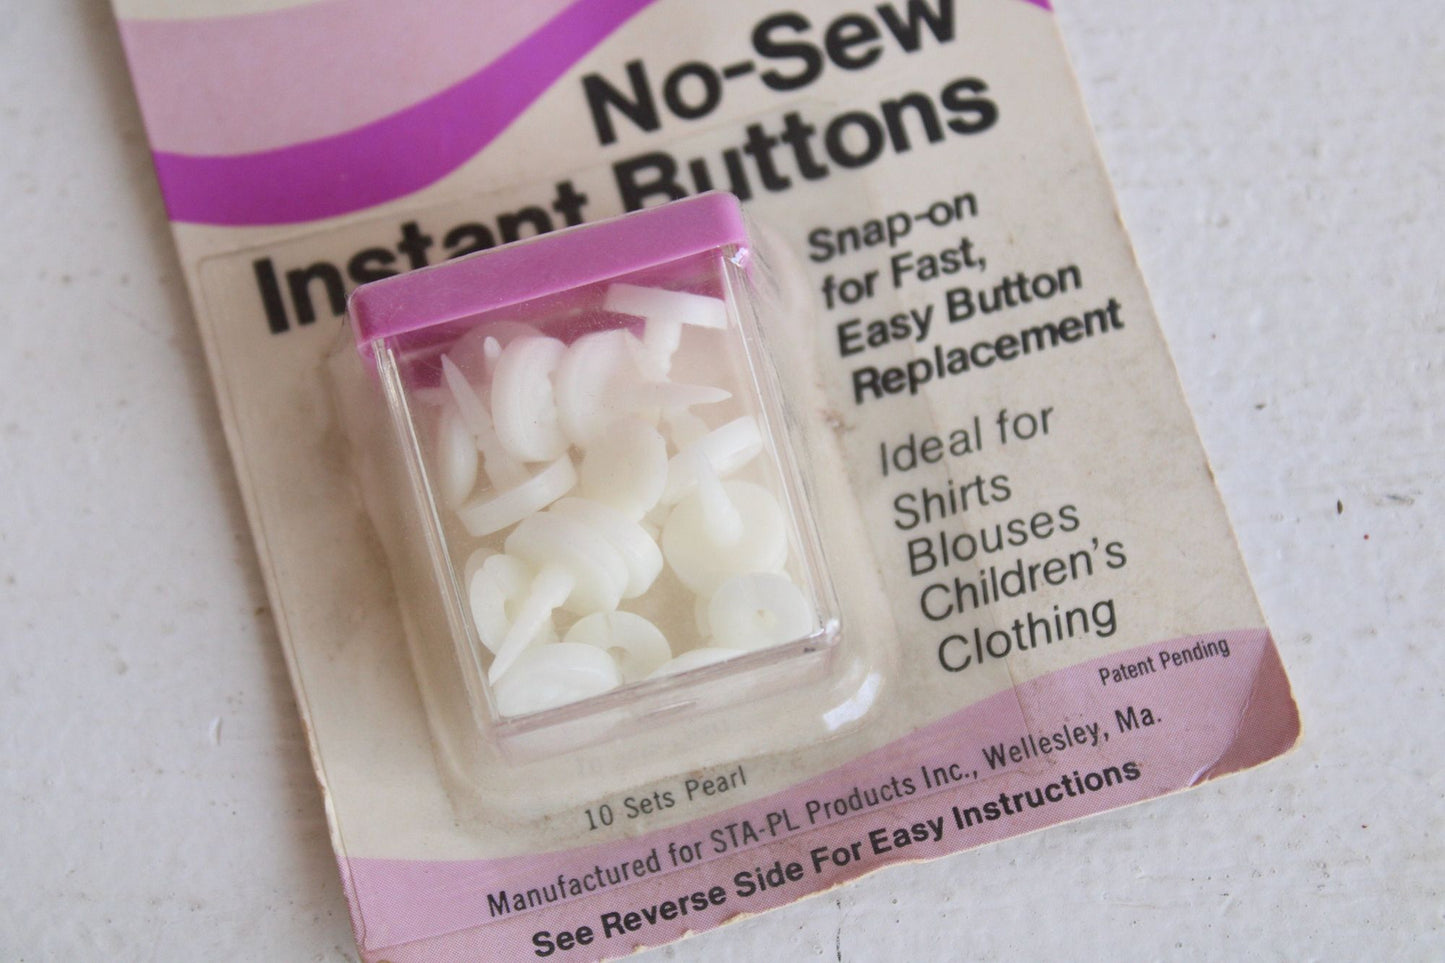 Vintage 1970s 1980s No Sew Buttons, New in Original Package